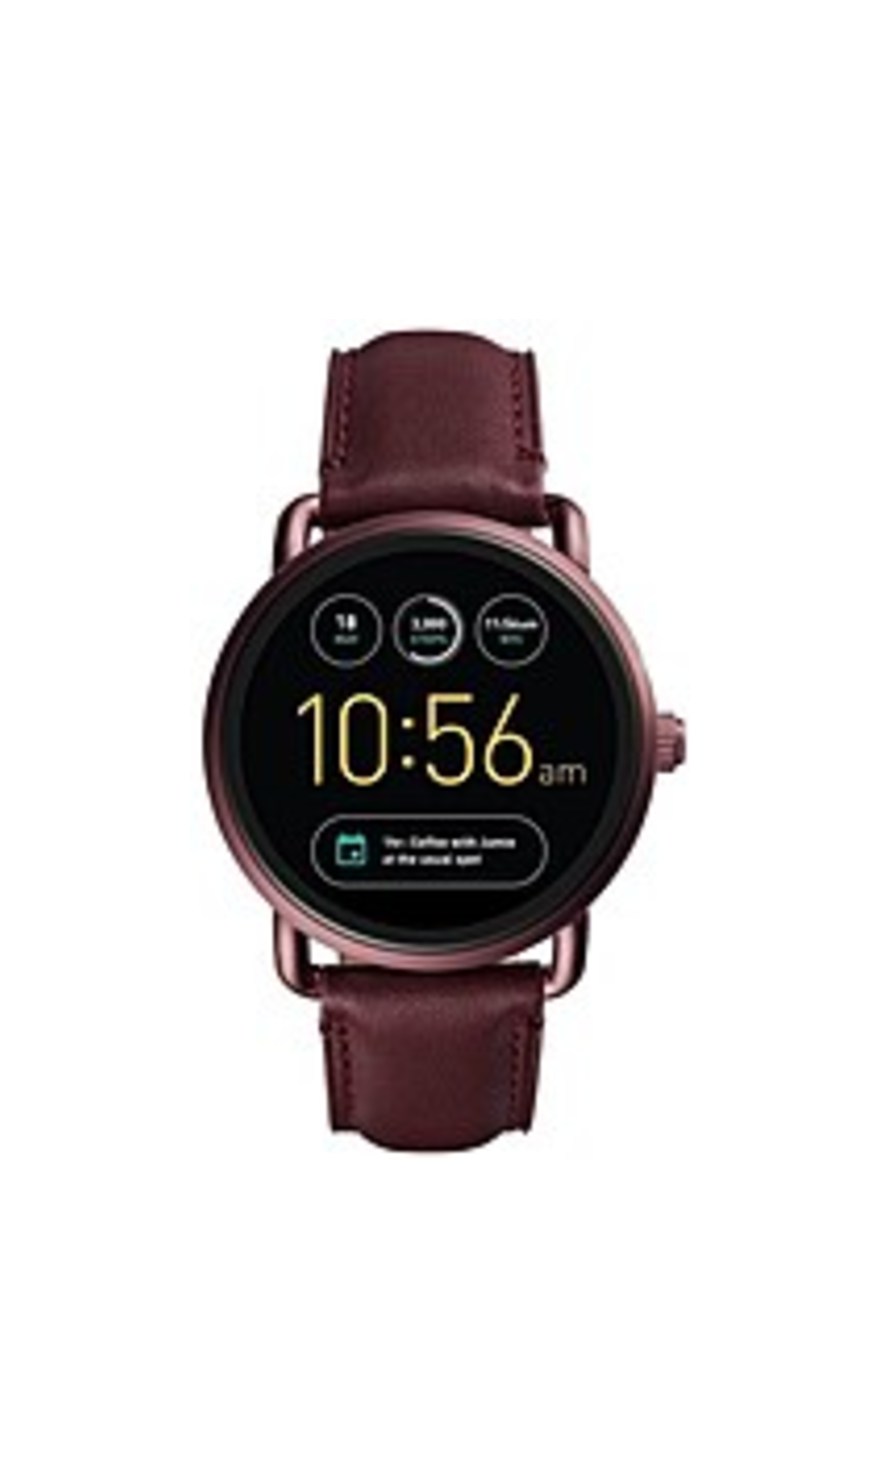 Fossil FTW2113 Q Wander Gen 2 1.8-inch Wine Leather Touchscreen Smartwatch - Red